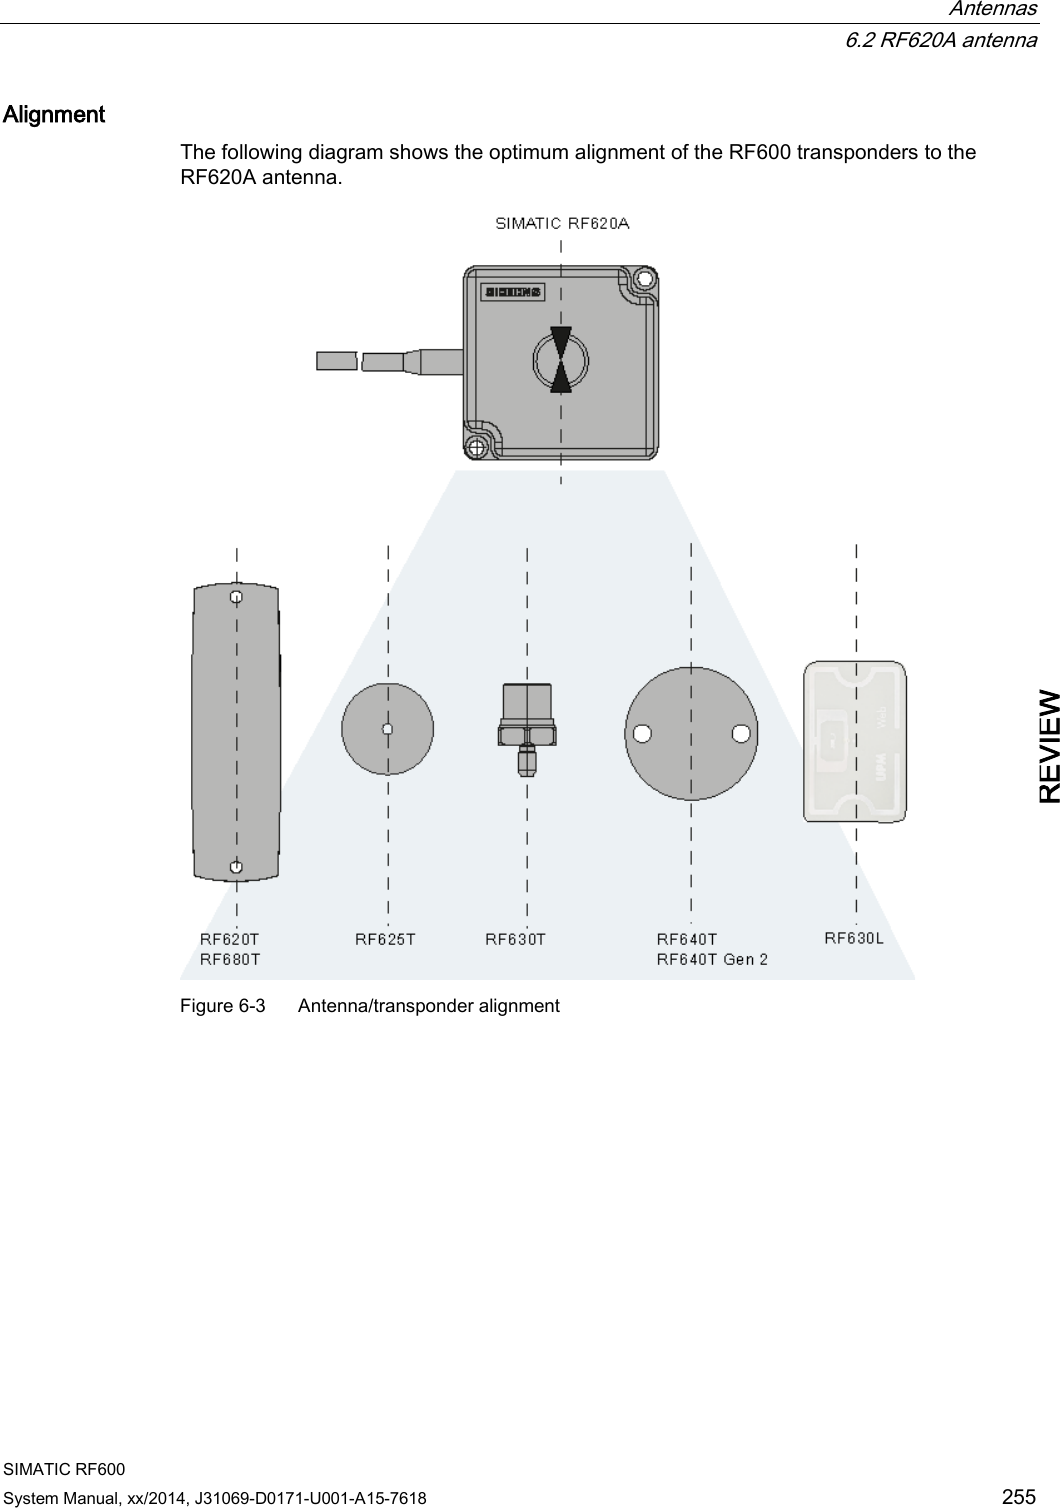  Antennas  6.2 RF620A antenna SIMATIC RF600 System Manual, xx/2014, J31069-D0171-U001-A15-7618 255 REVIEW Alignment The following diagram shows the optimum alignment of the RF600 transponders to the RF620A antenna.  Figure 6-3  Antenna/transponder alignment 